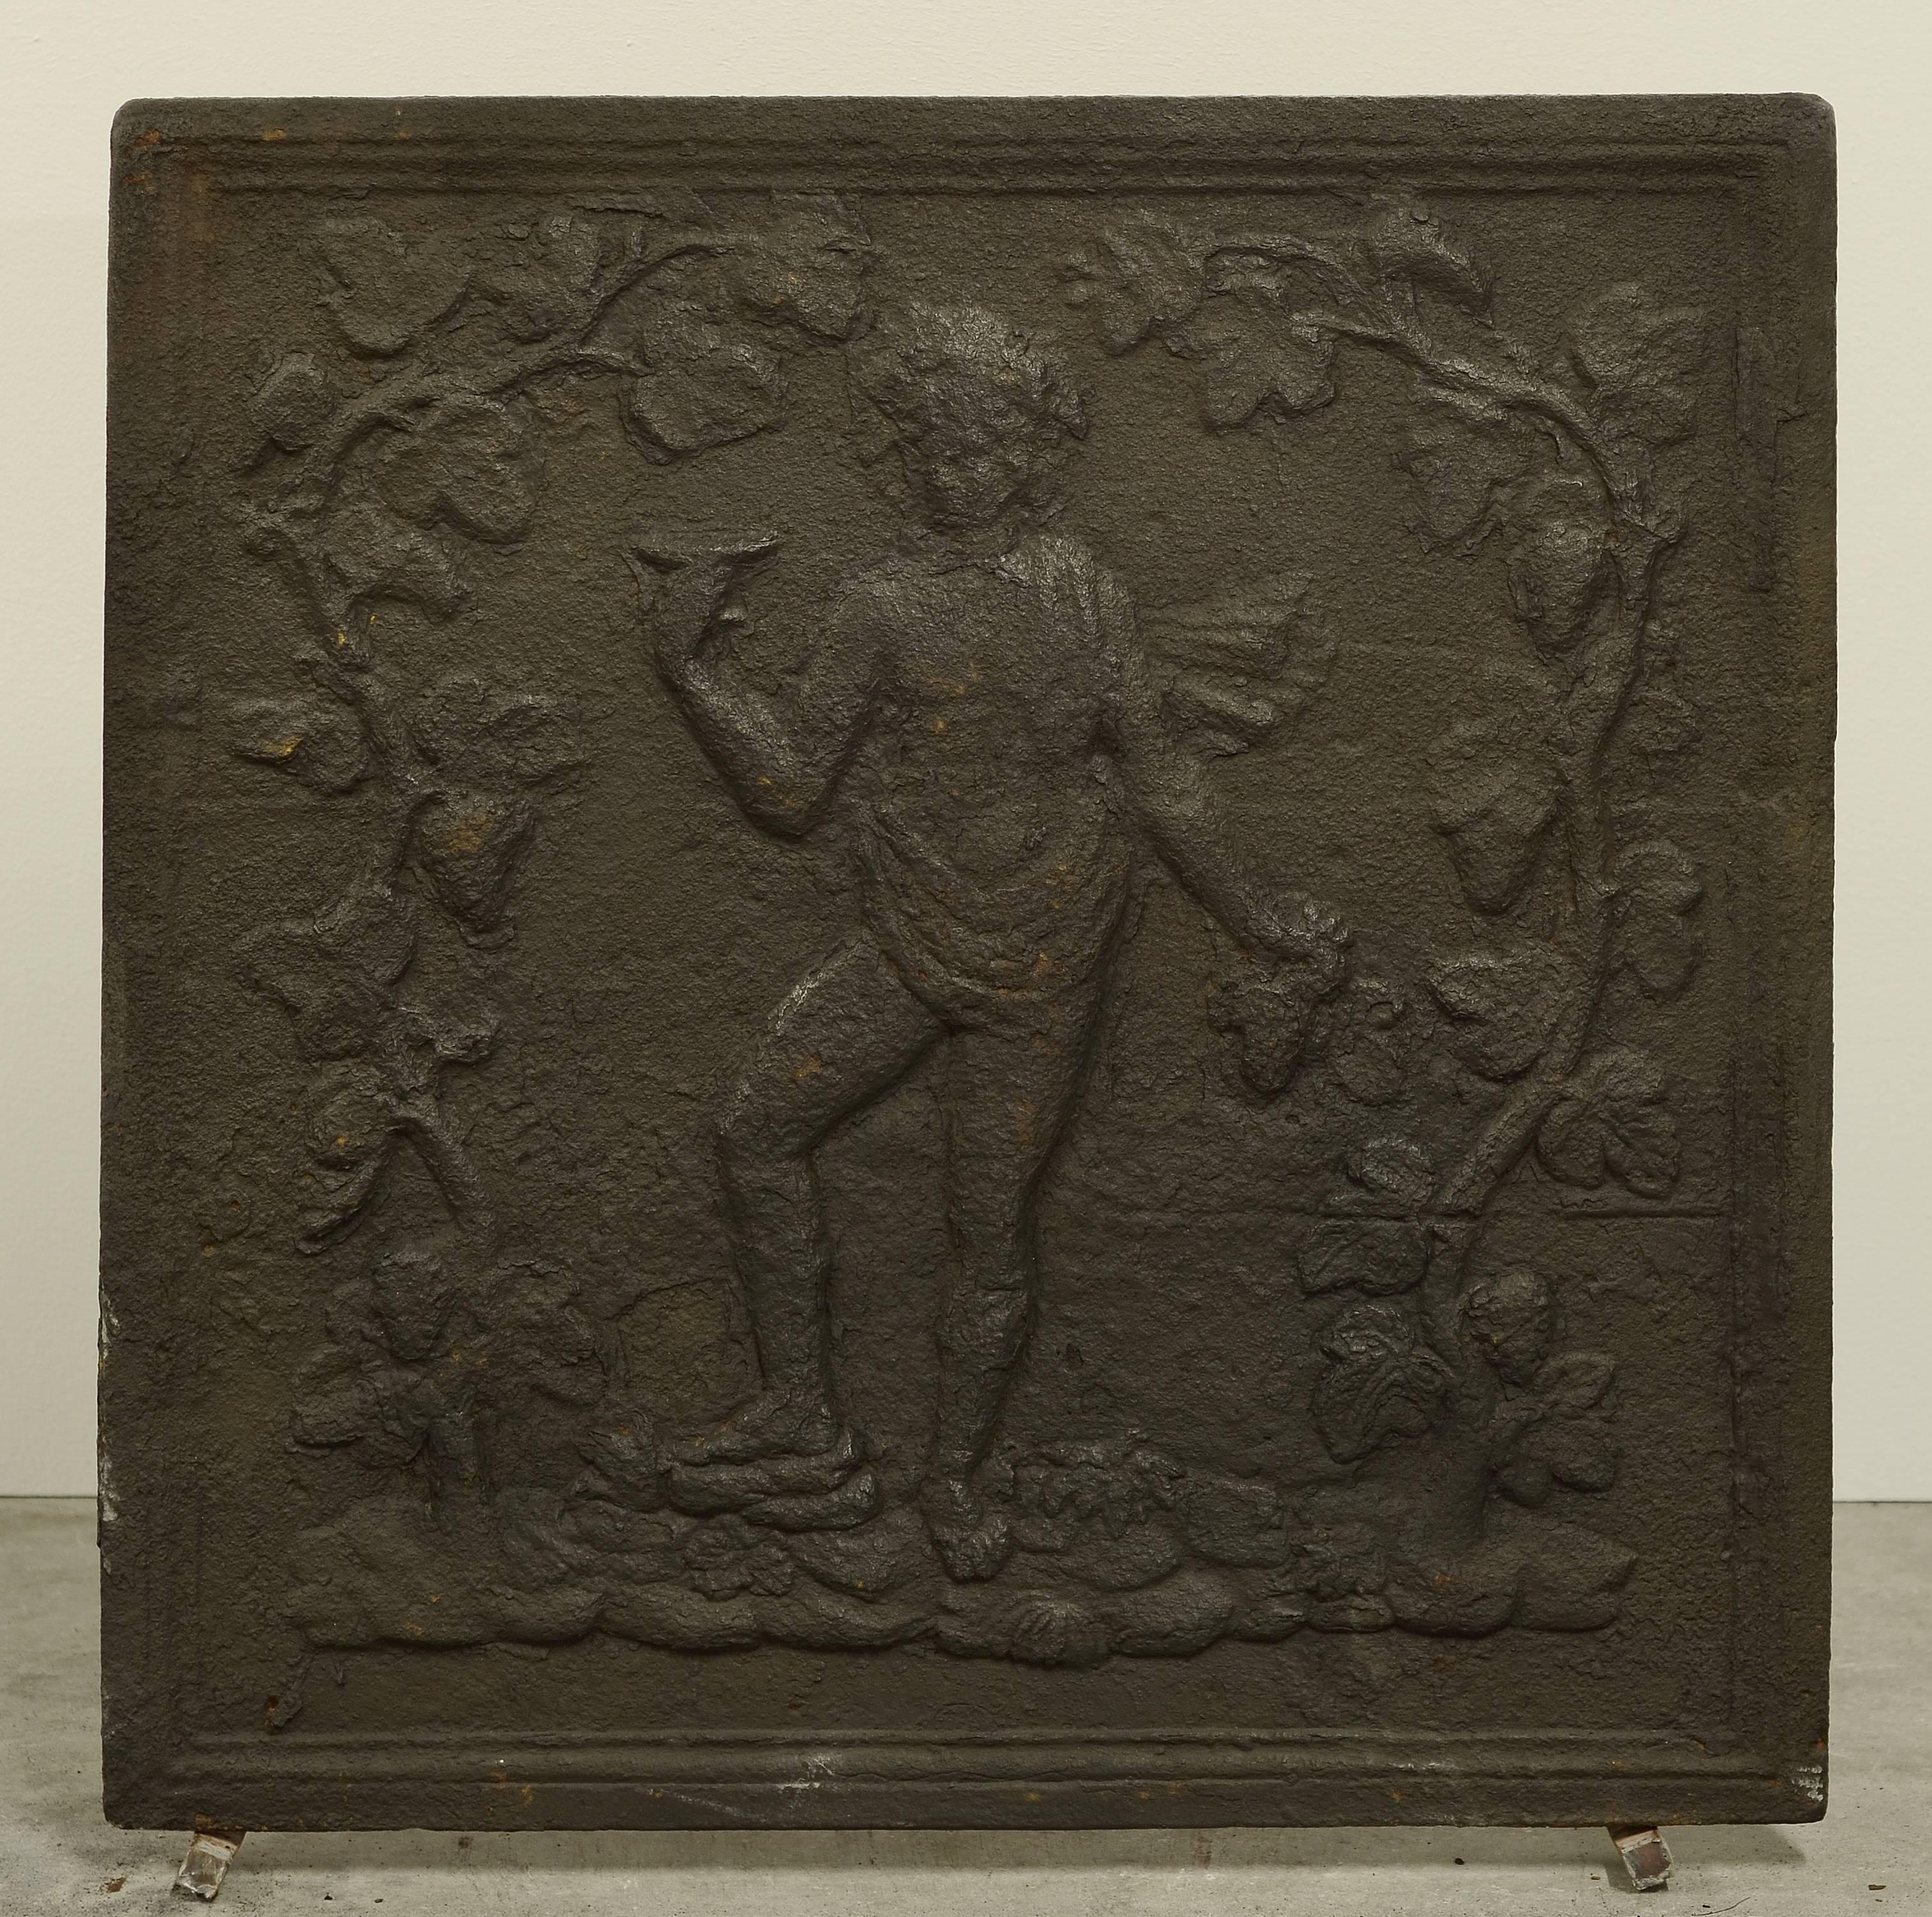 Great square antique cast iron fireback showing a female drinking.

Excellent condition, great dimension.
Can be used in a fireplace or as backsplash.